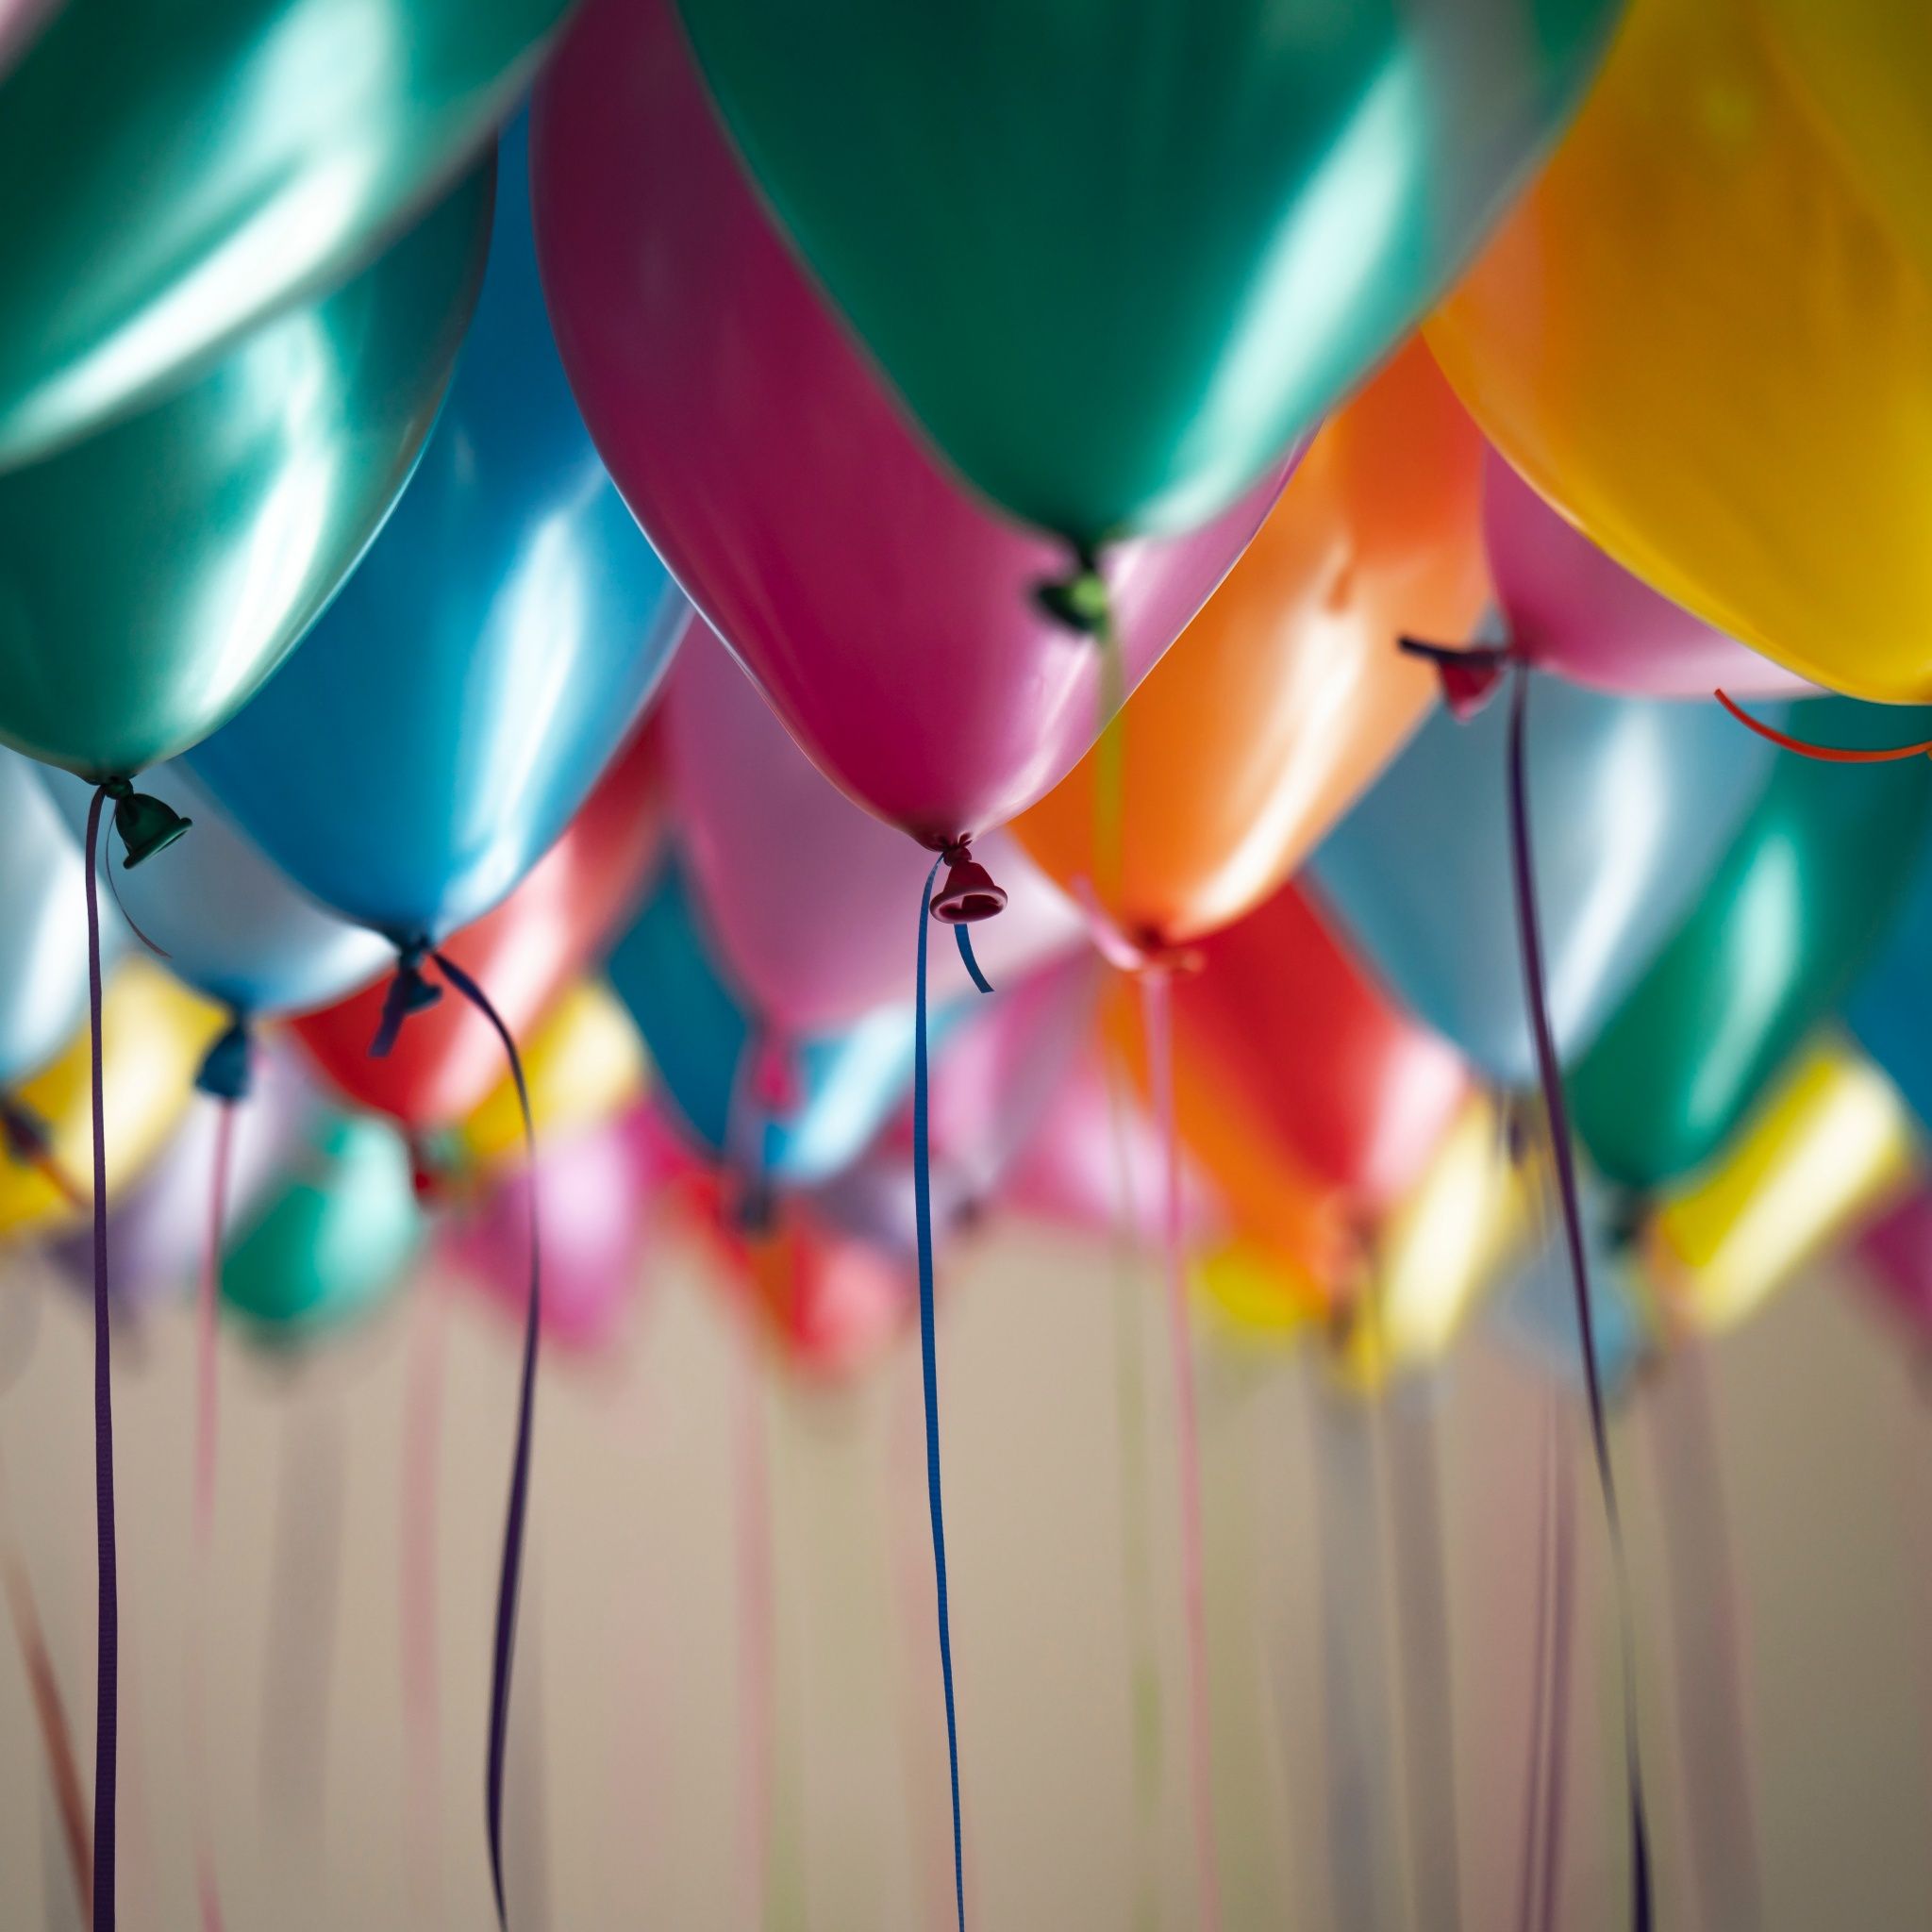 A group of colorful balloons tied together. - Balloons